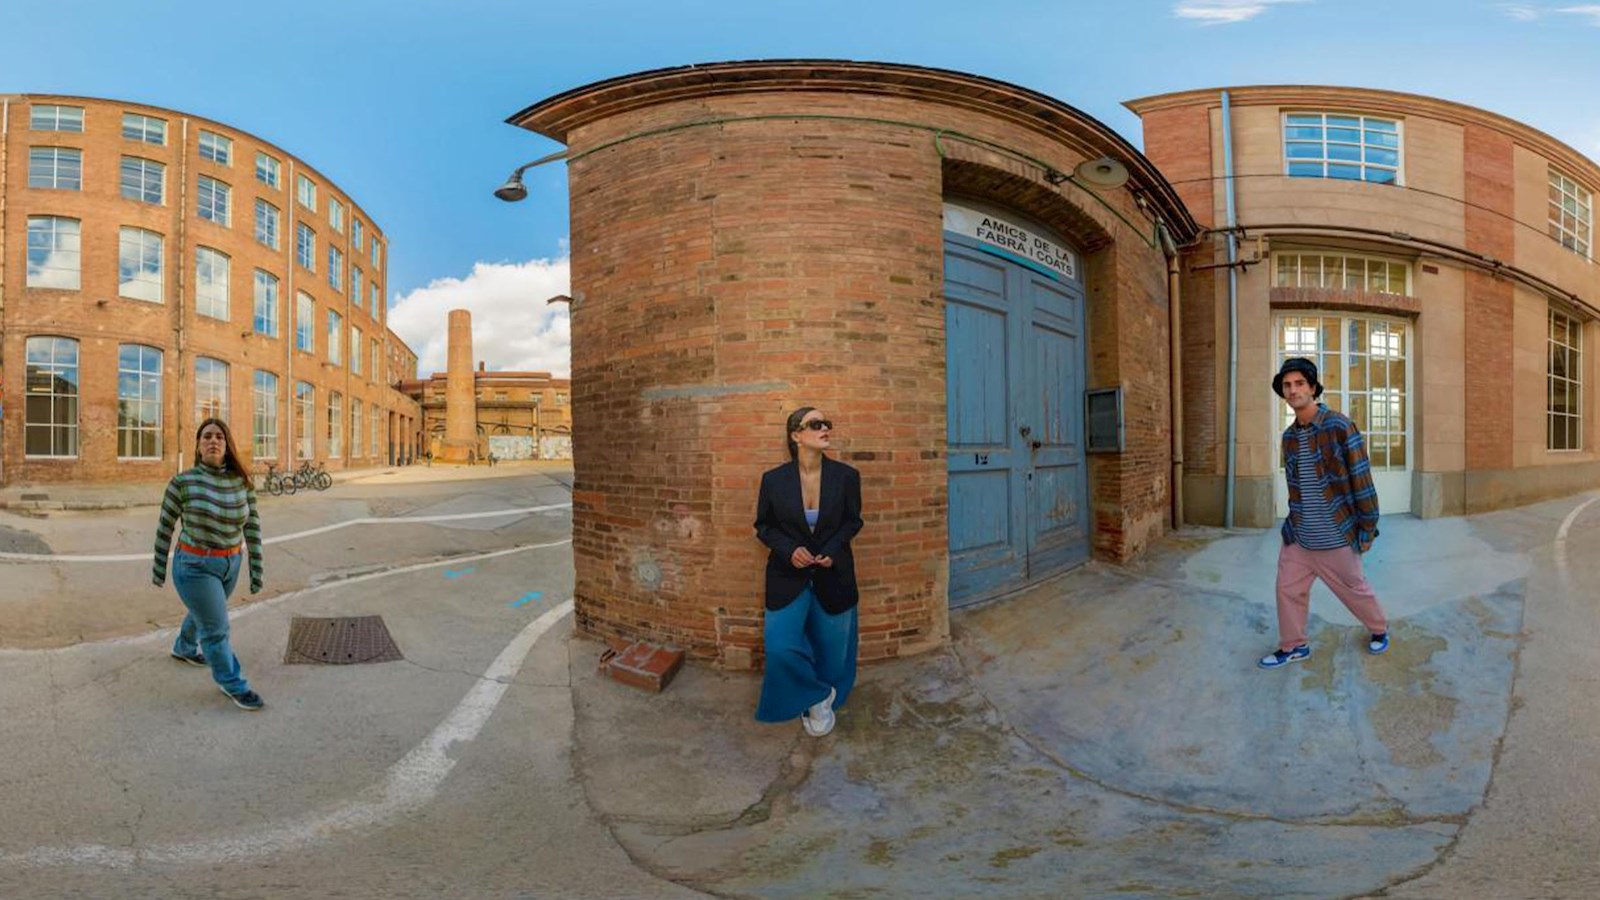 Three people standing on the street with a fish eye effect on the camera